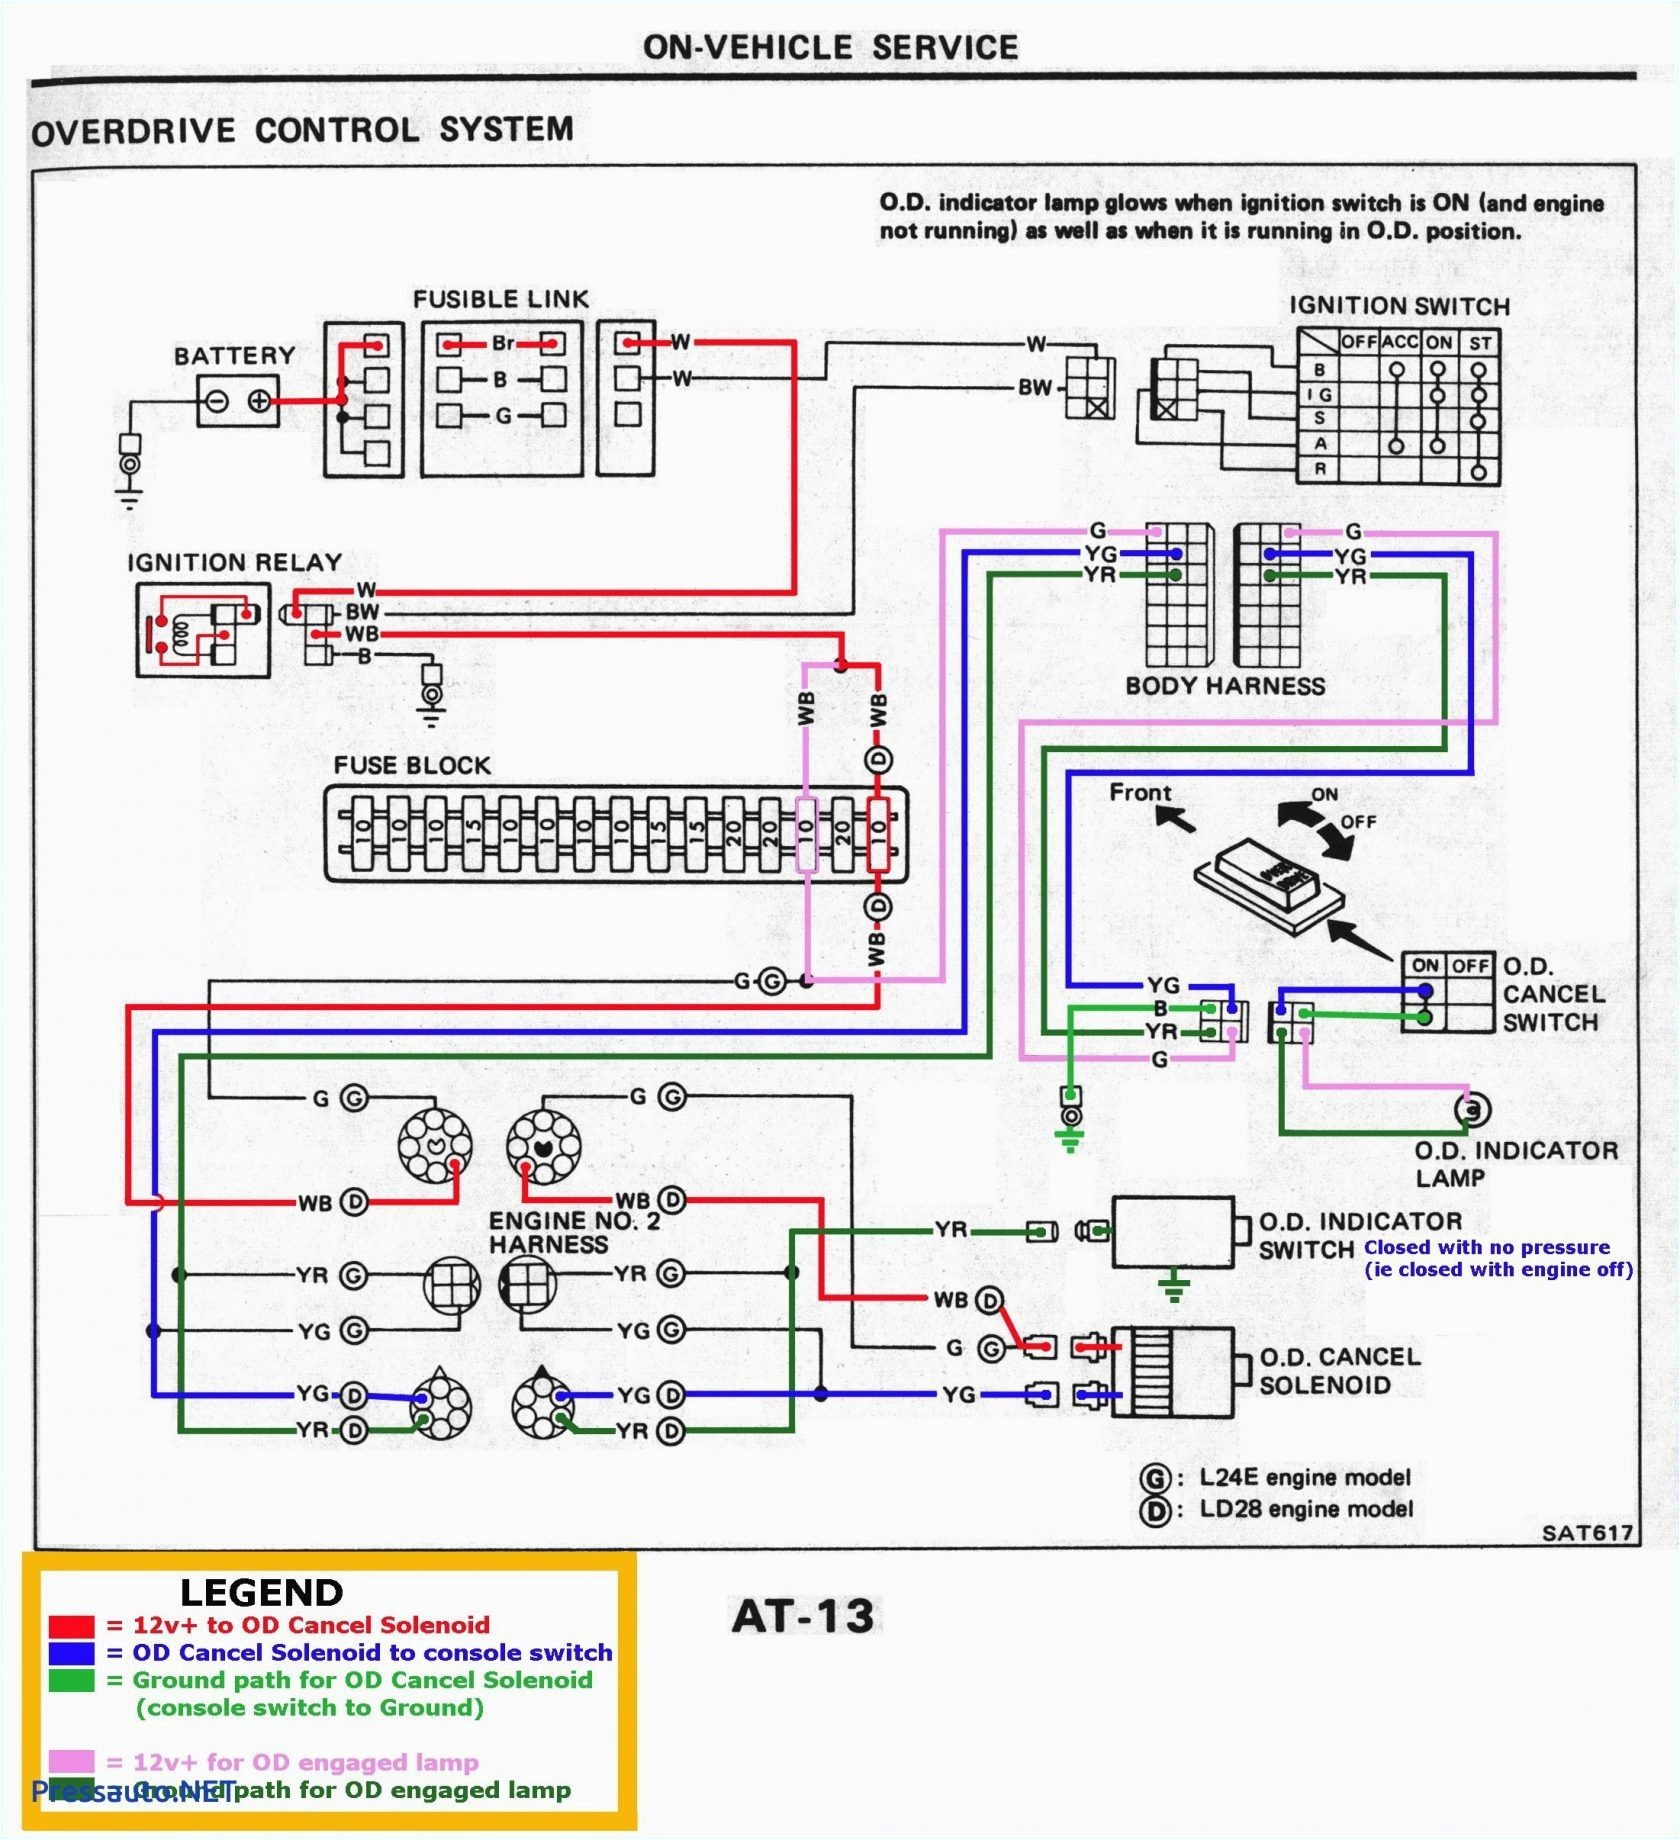 car stereo wiring harness diagram in addition toyota dome light 1997 corolla dome light wiring schematic